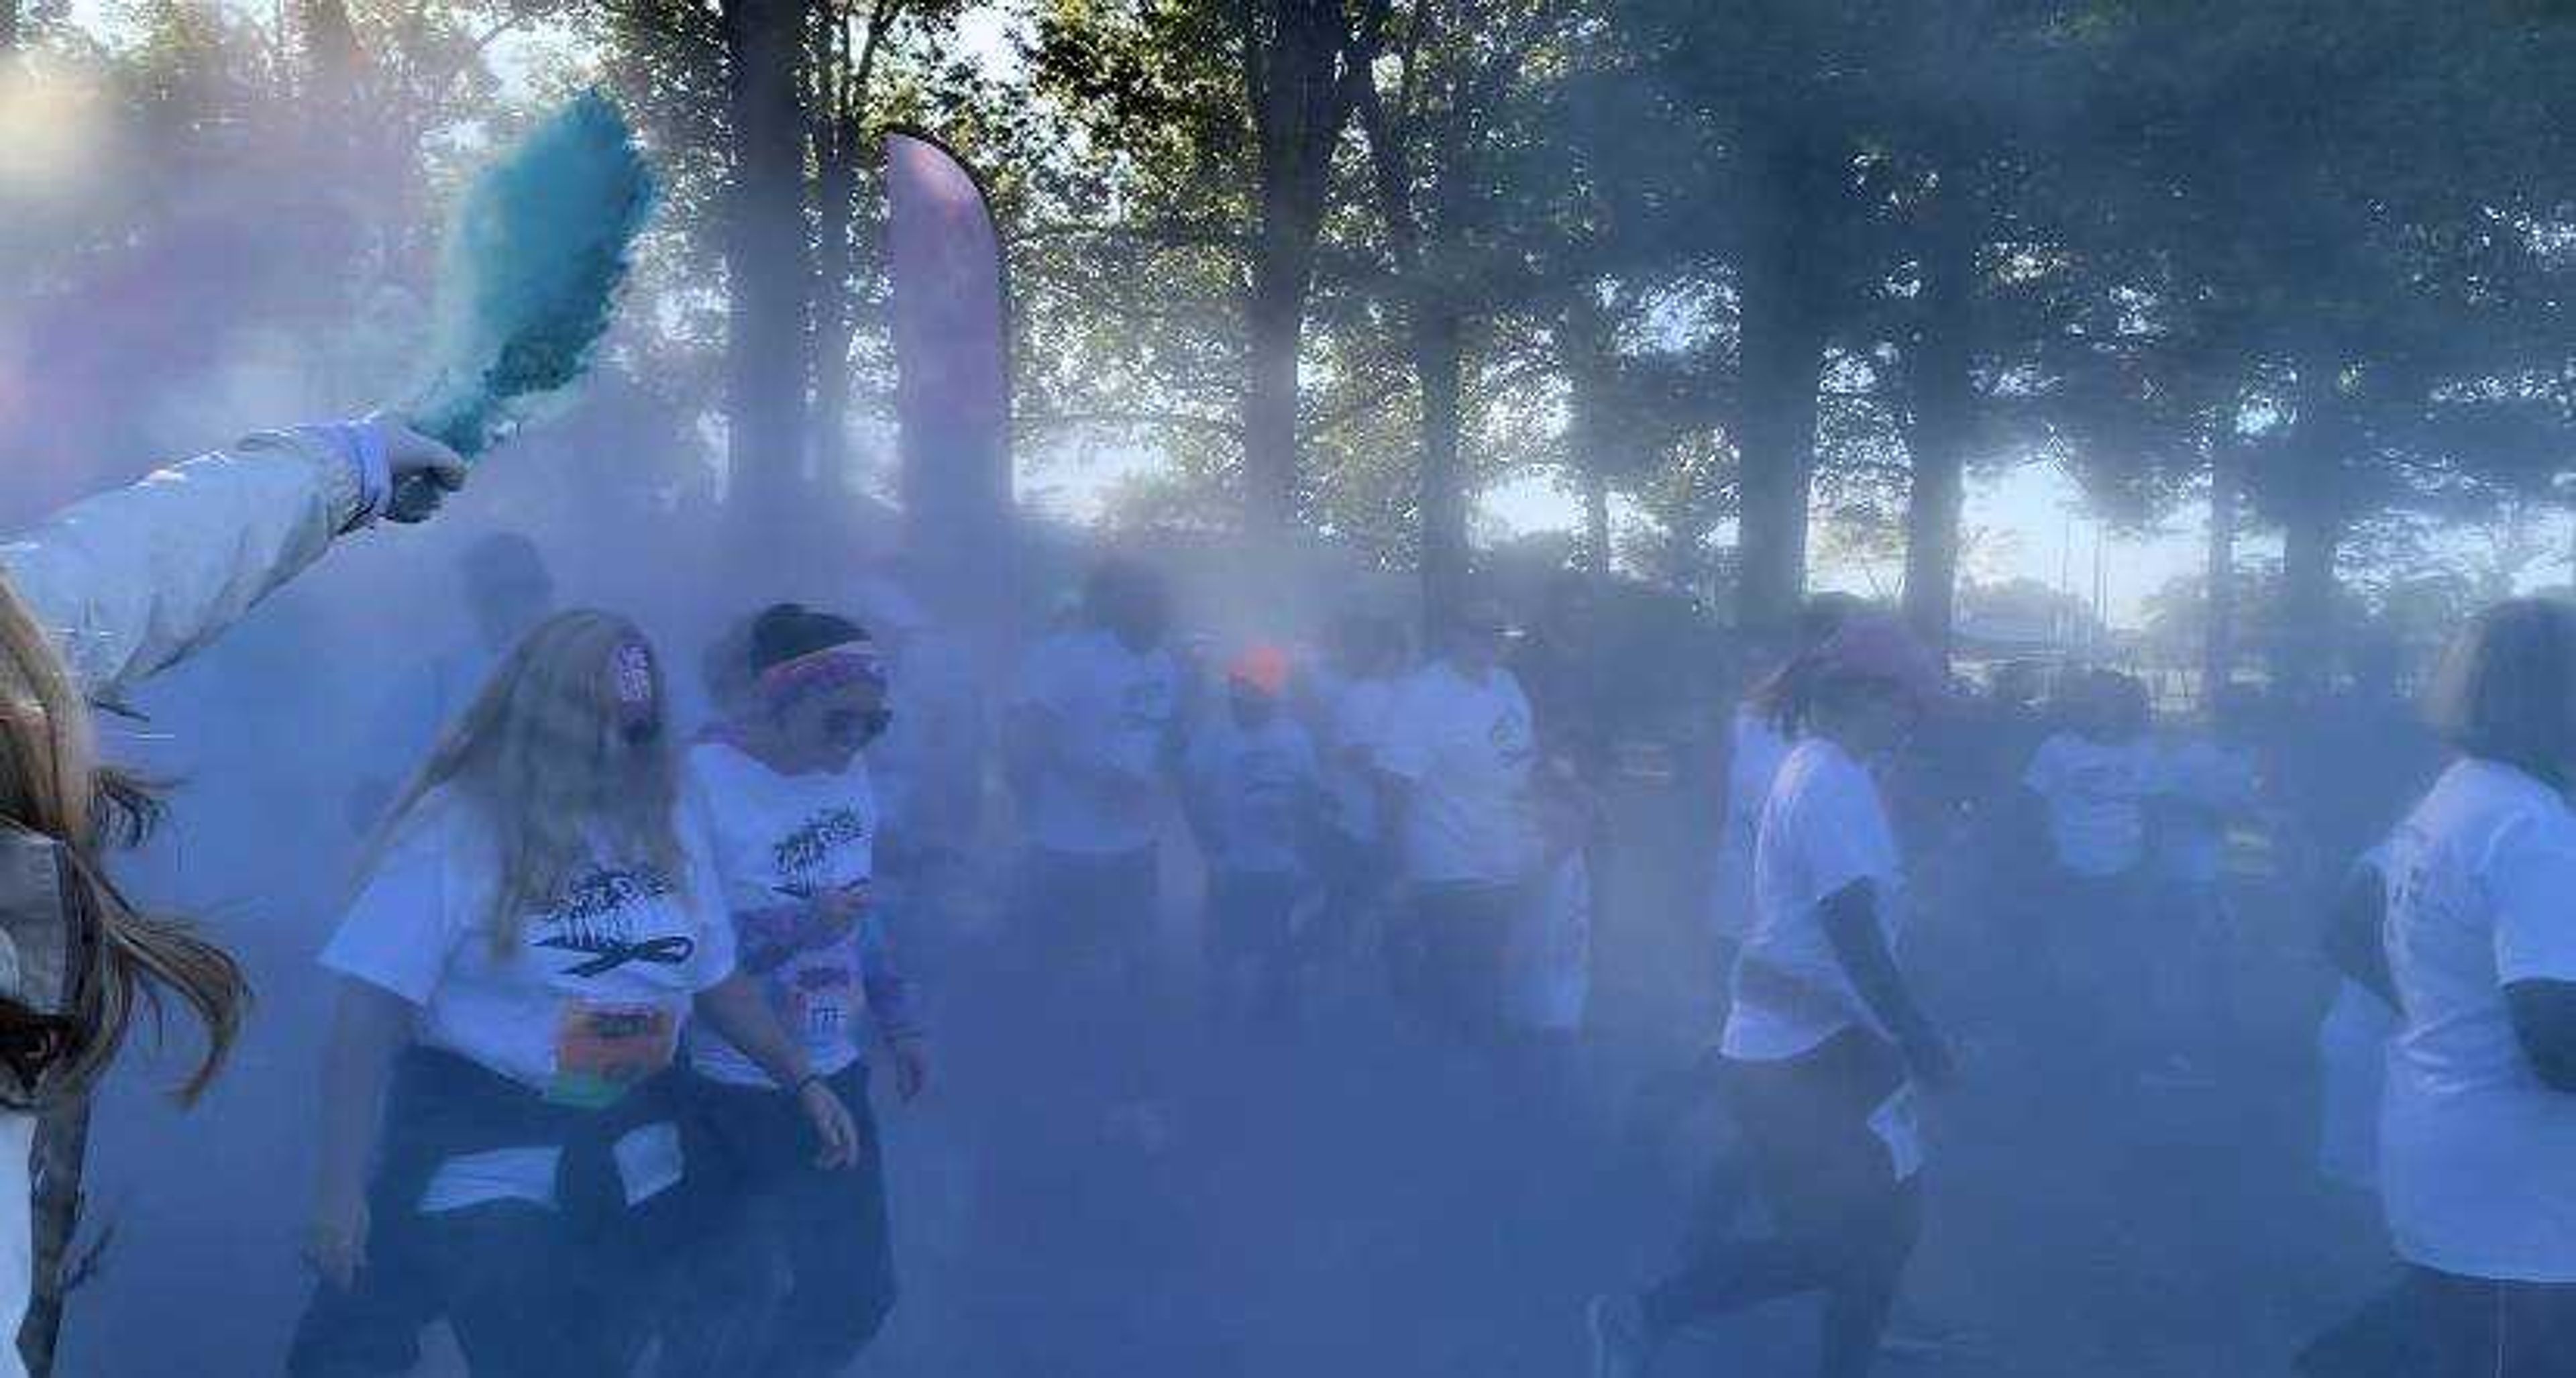 St. Francis Employees kicking off the Color Run 5k by raining color chalk in the air at Arena Park, Oct. 12 in Cape Girardeau, Missouri.